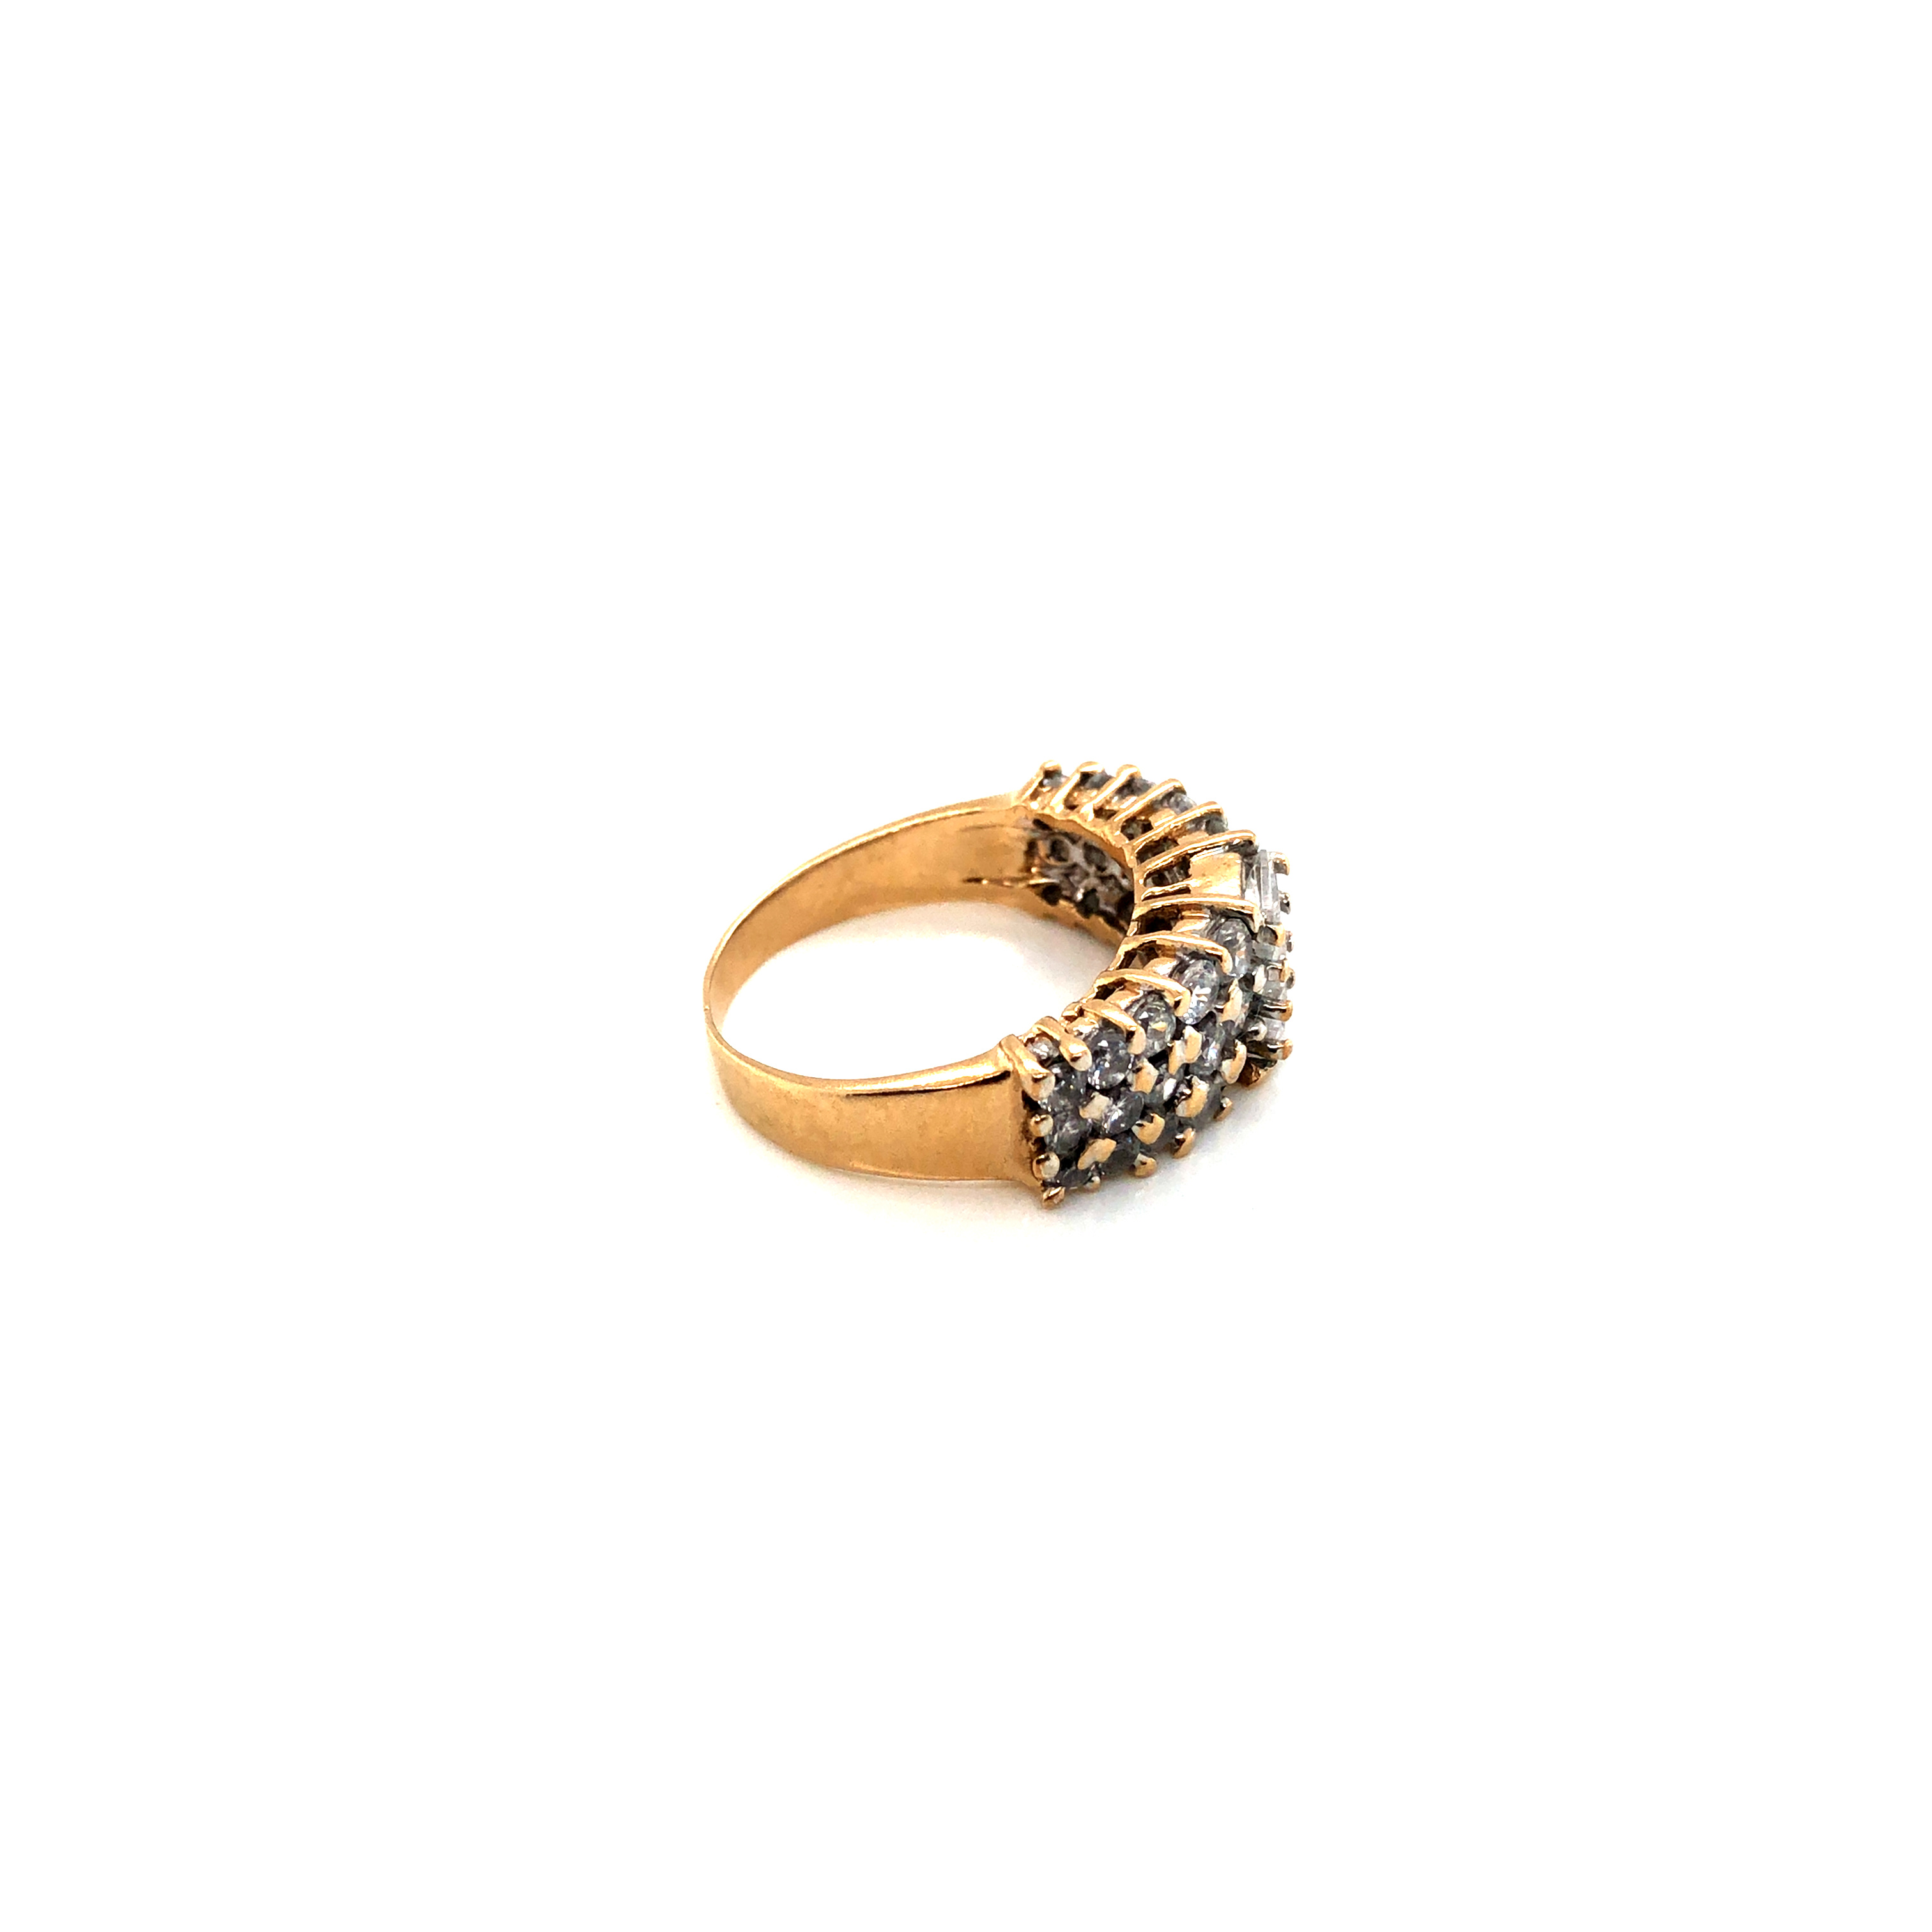 A HALLMARKED 9ct GOLD TAPERED CLAW SET CUBIC ZIRCONIA RING. FINGER SIZE N. WEIGHT 5.18grms. - Image 3 of 4